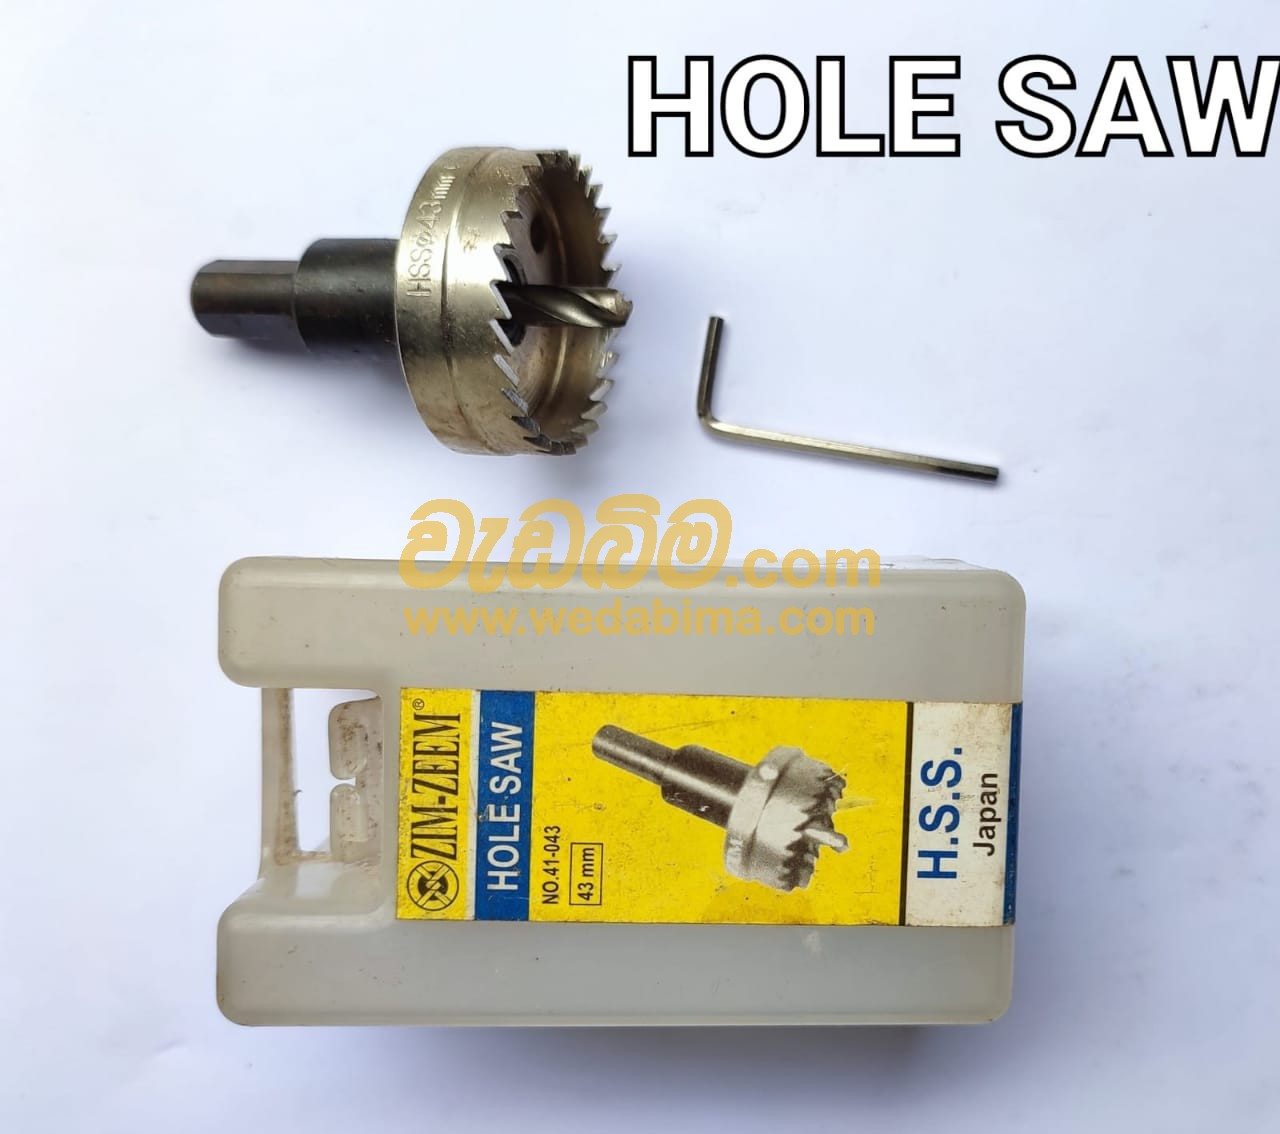 Cover image for hole saw price